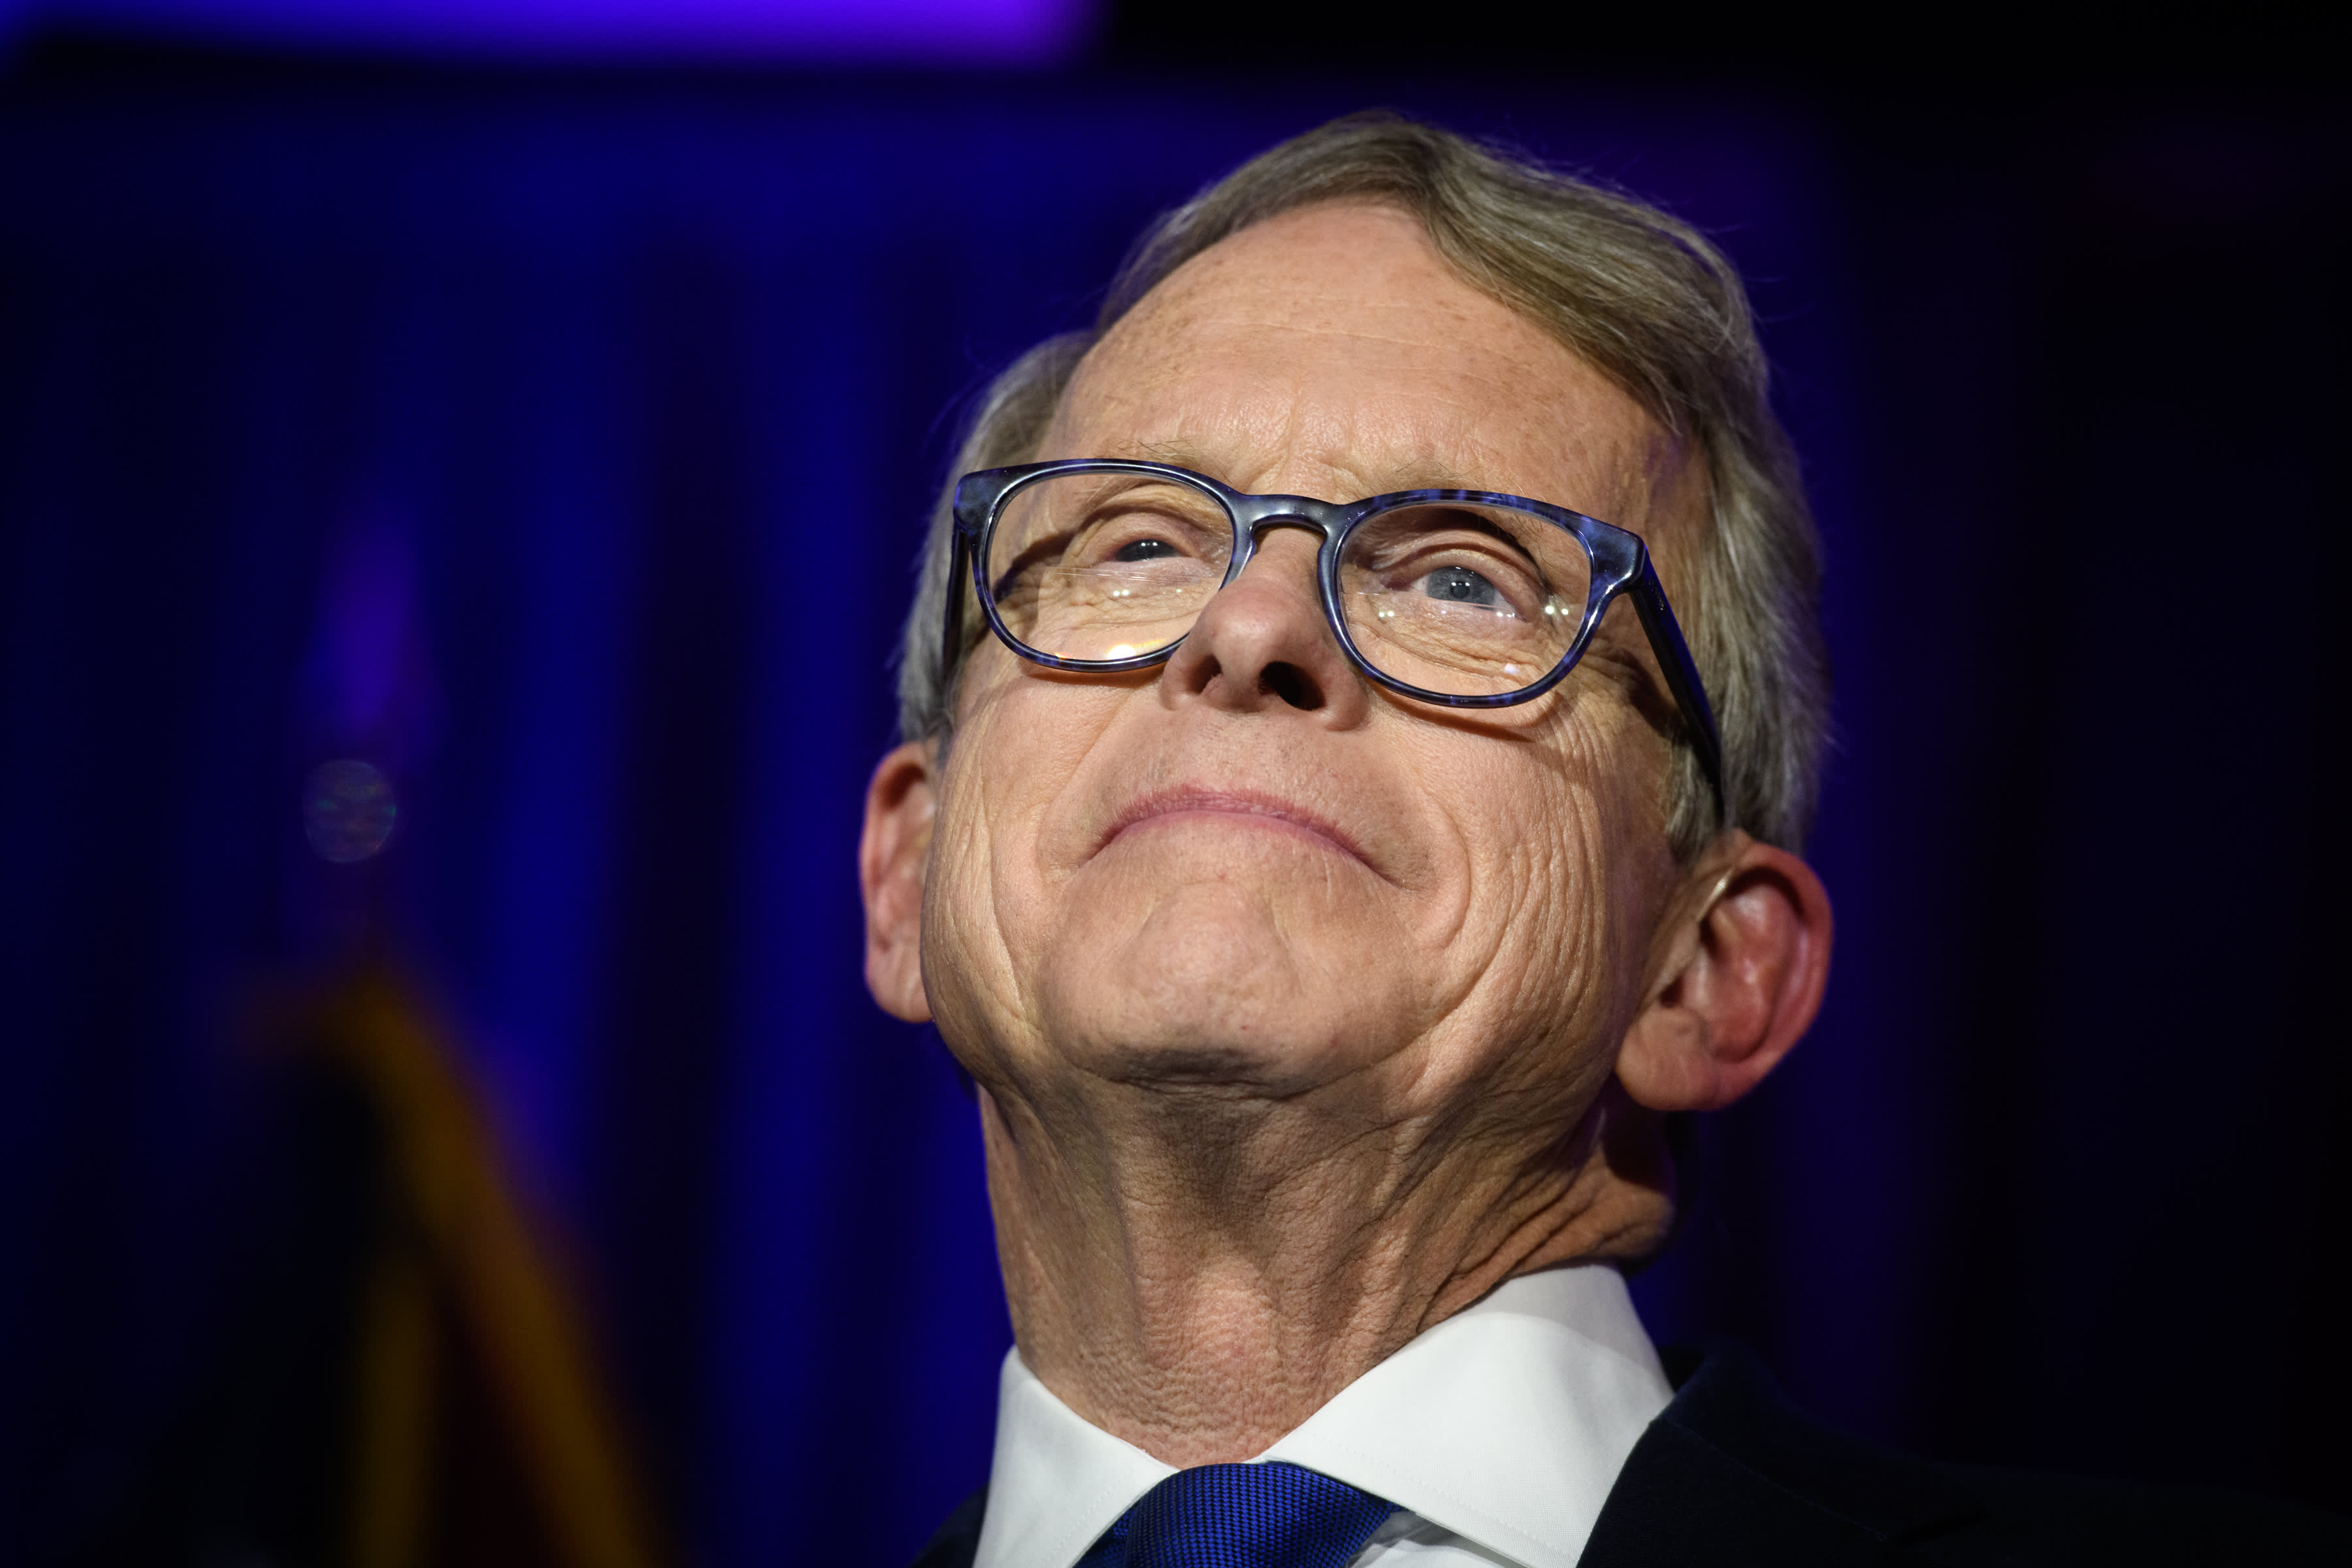 Ohio Governor DeWine Says Intel Delay On Billion Chip Plant Is About ‘leverage’